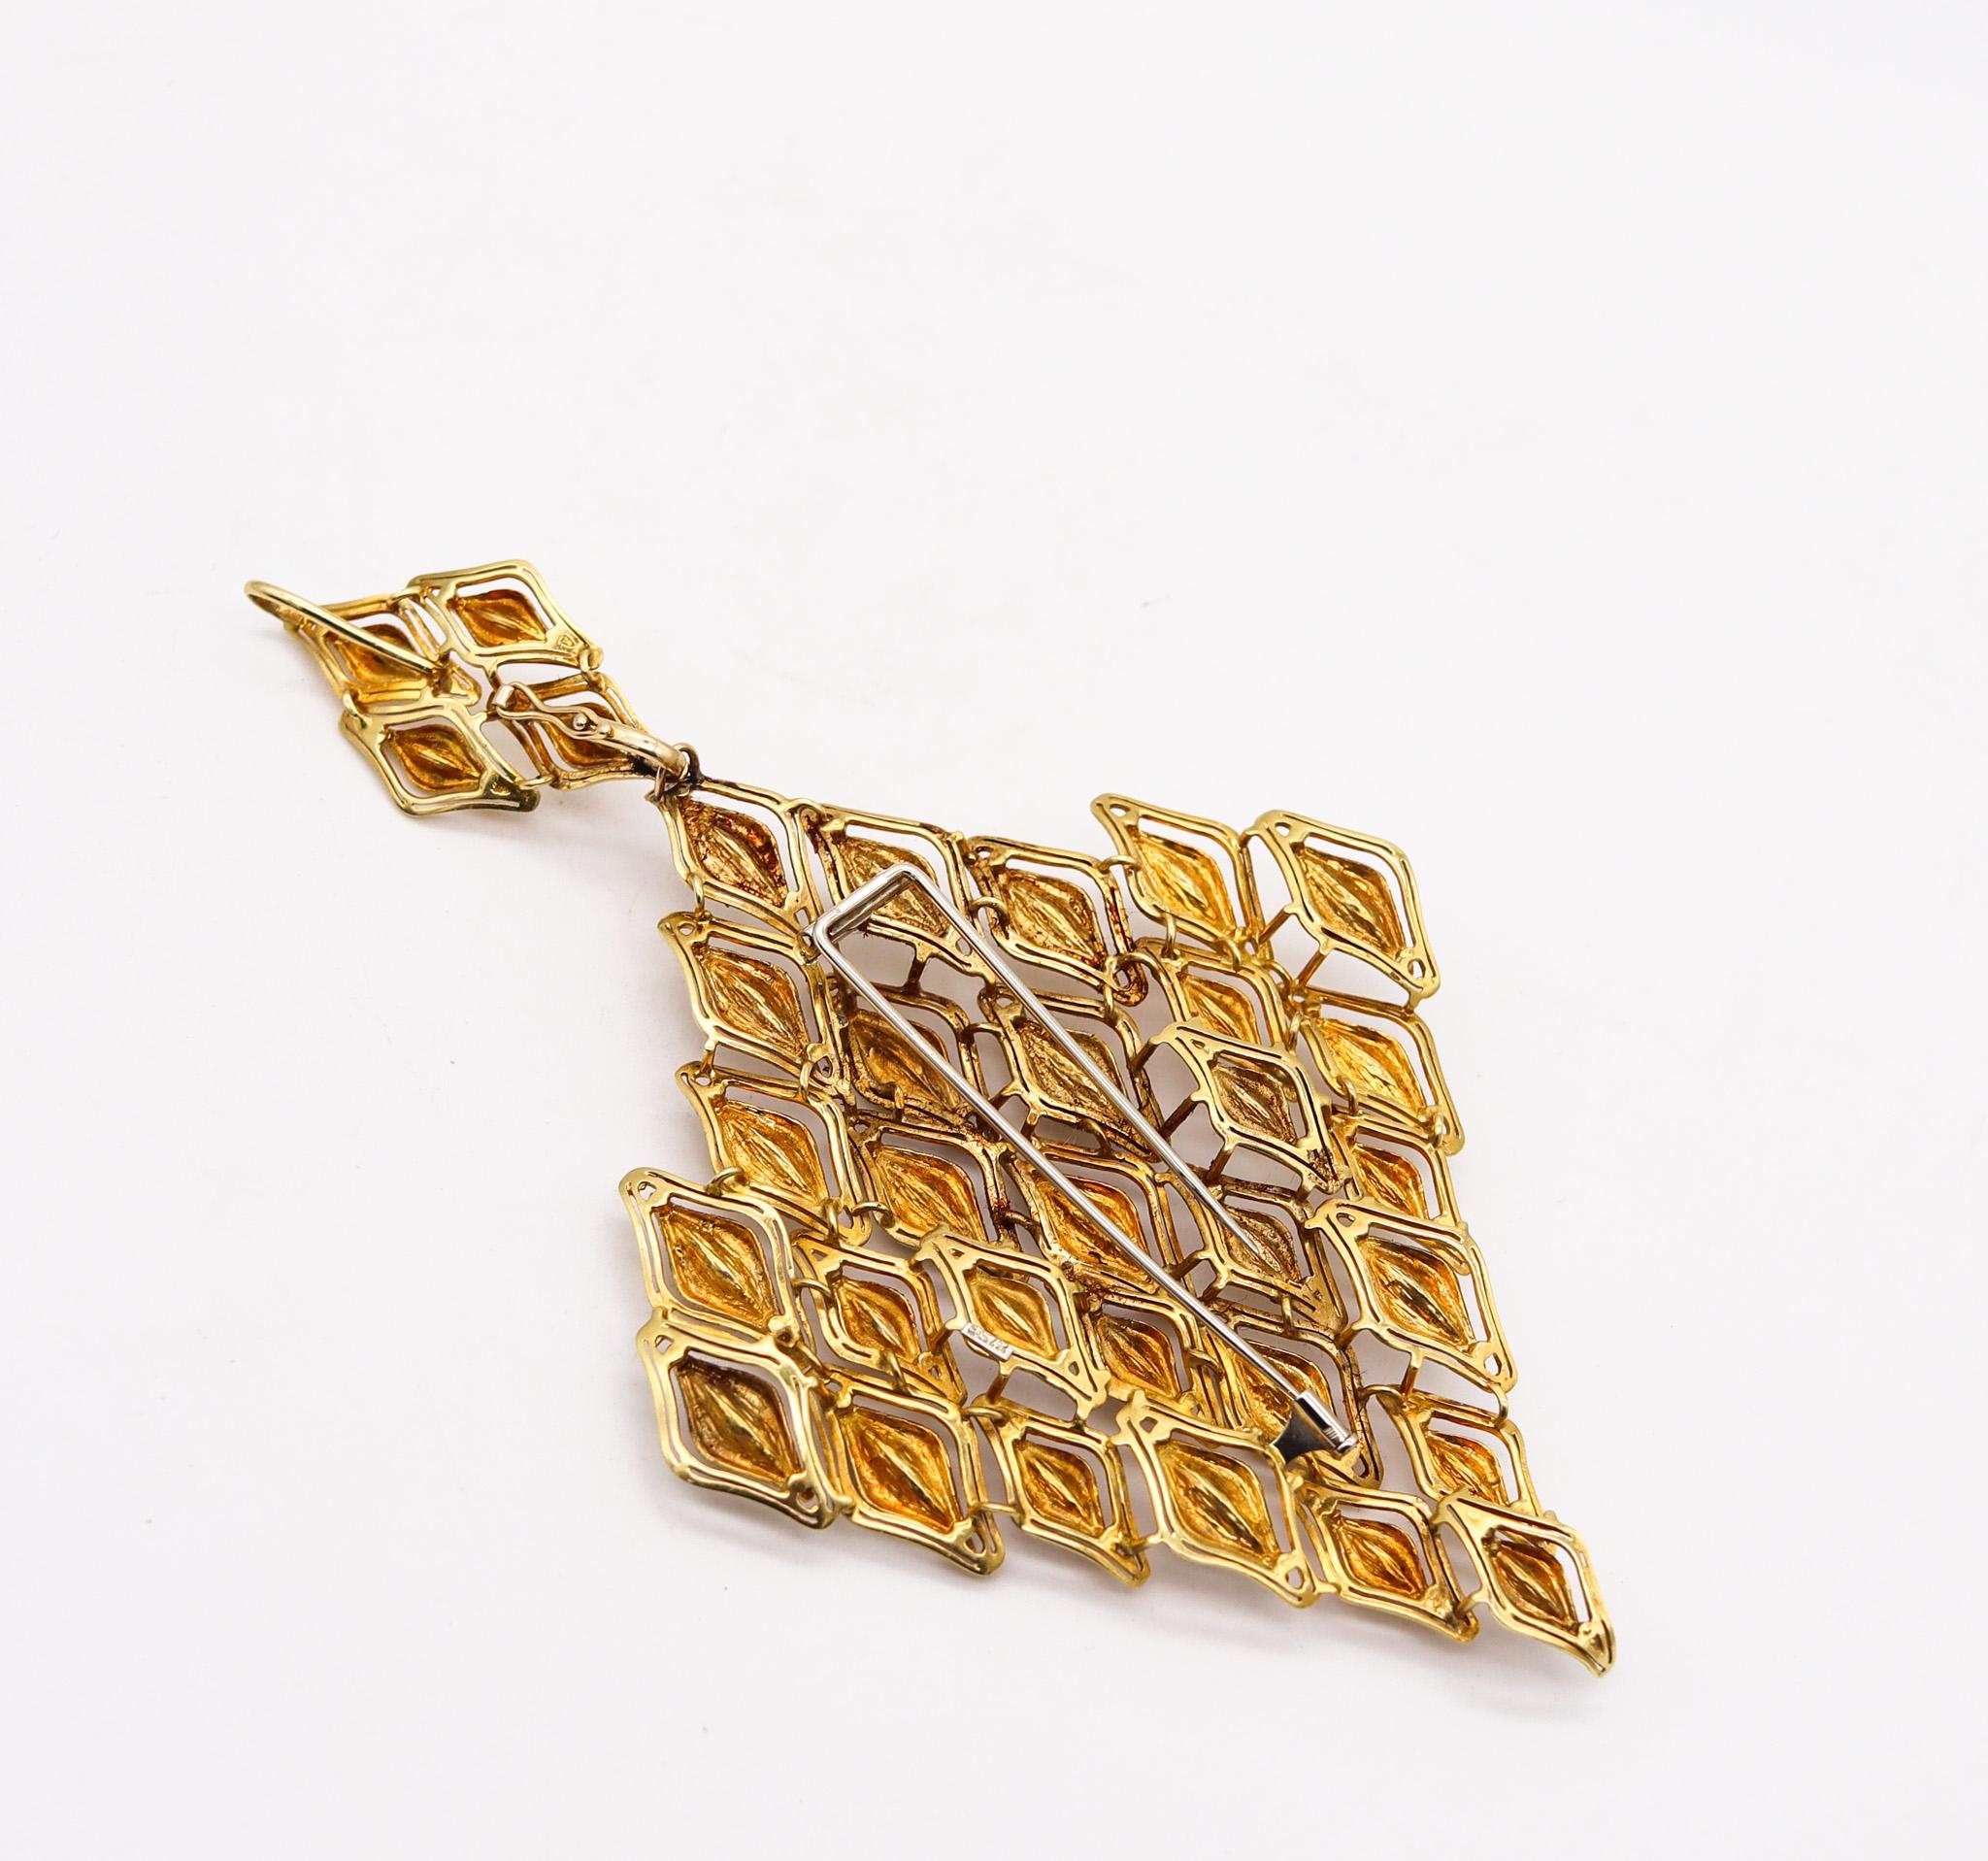 Women's Spritzer & Furhmann 1960 Retro Modernist Large Pendant In Solid 18Kt Yellow Gold For Sale